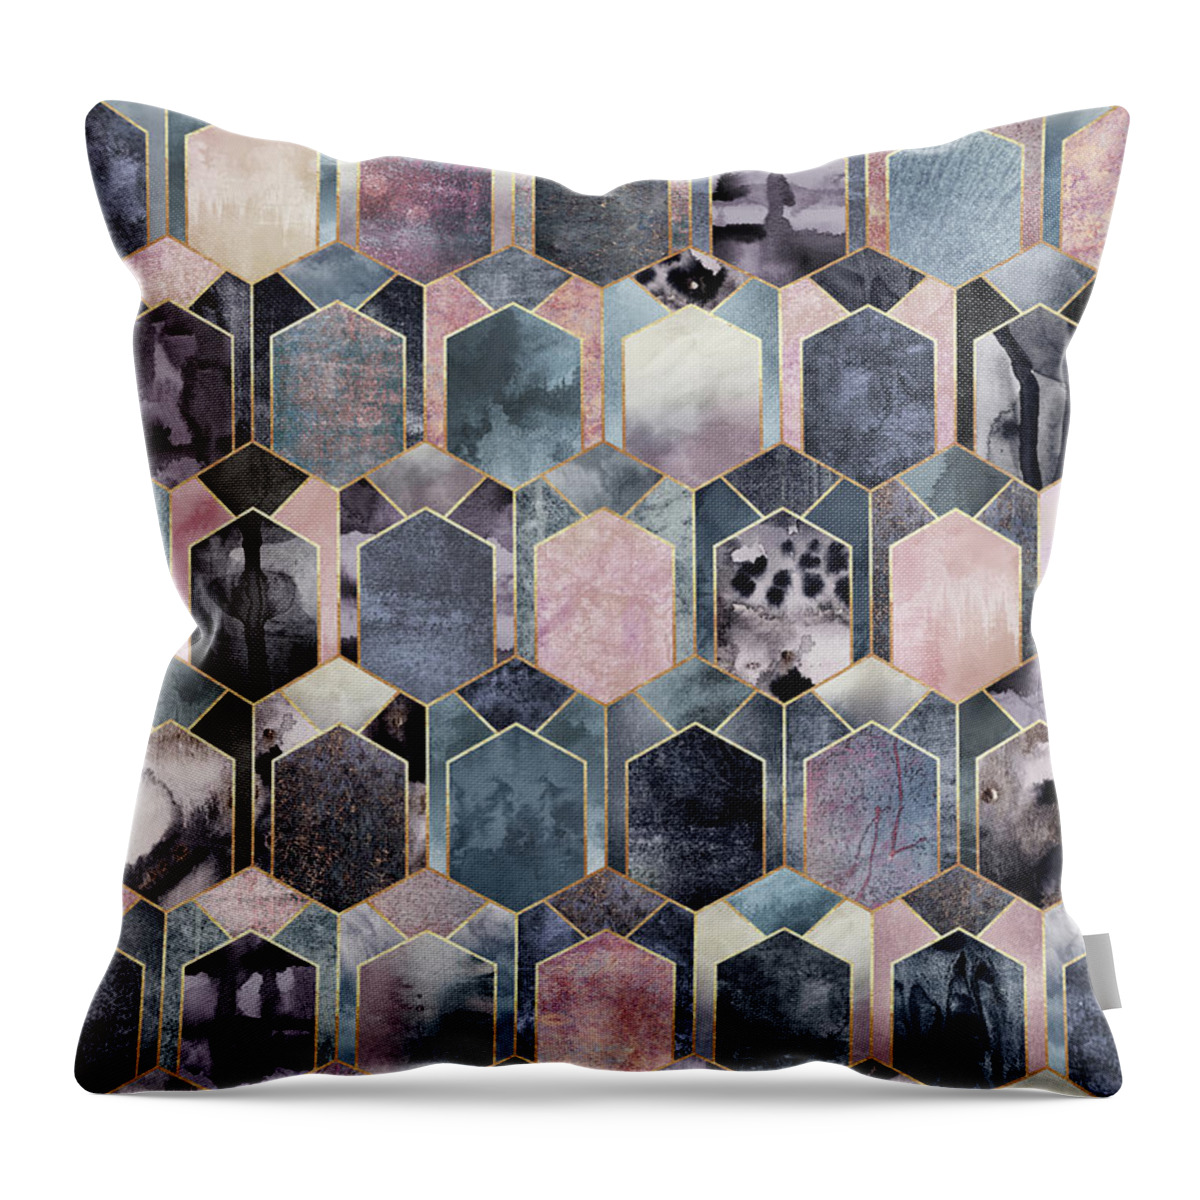 Graphic Throw Pillow featuring the digital art Art Deco Dream 1 by Elisabeth Fredriksson